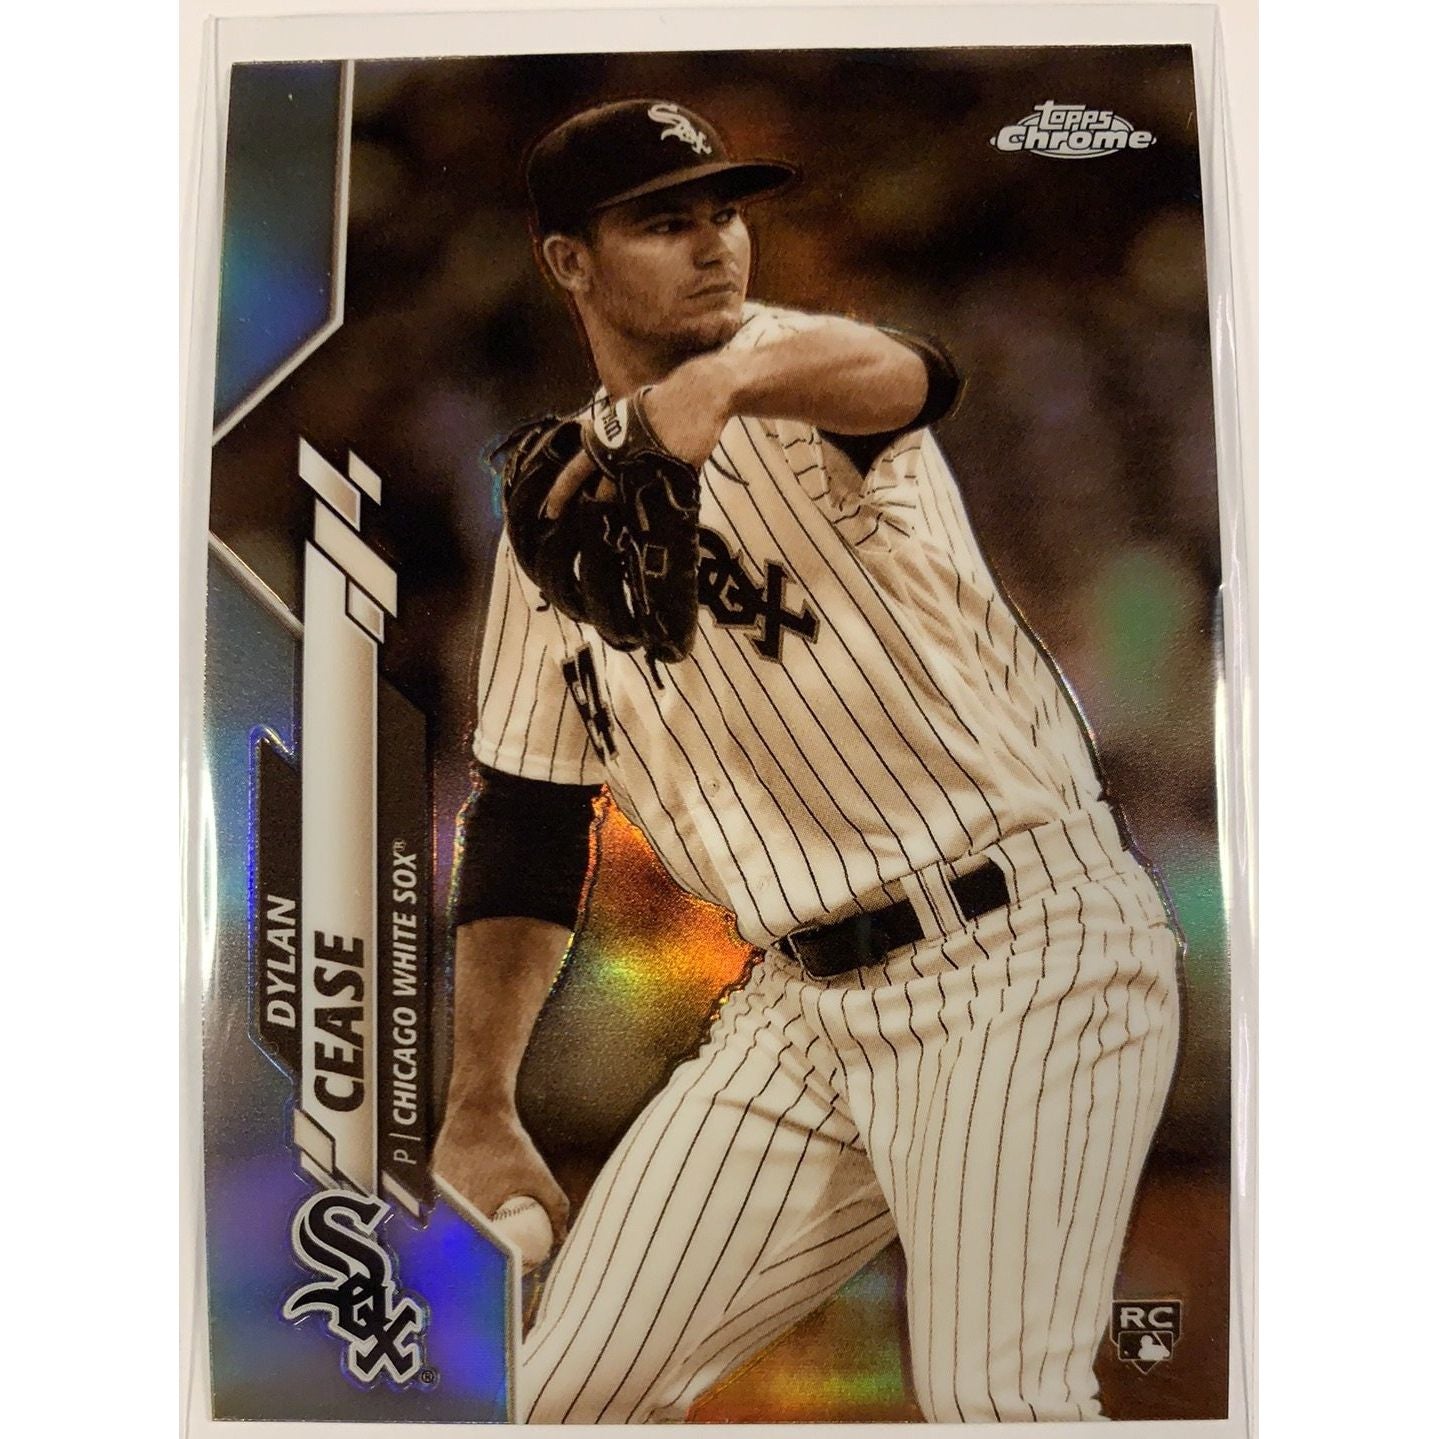  2020 Topps Chrome Dylan Cease RC Sepia Refractor  Local Legends Cards & Collectibles